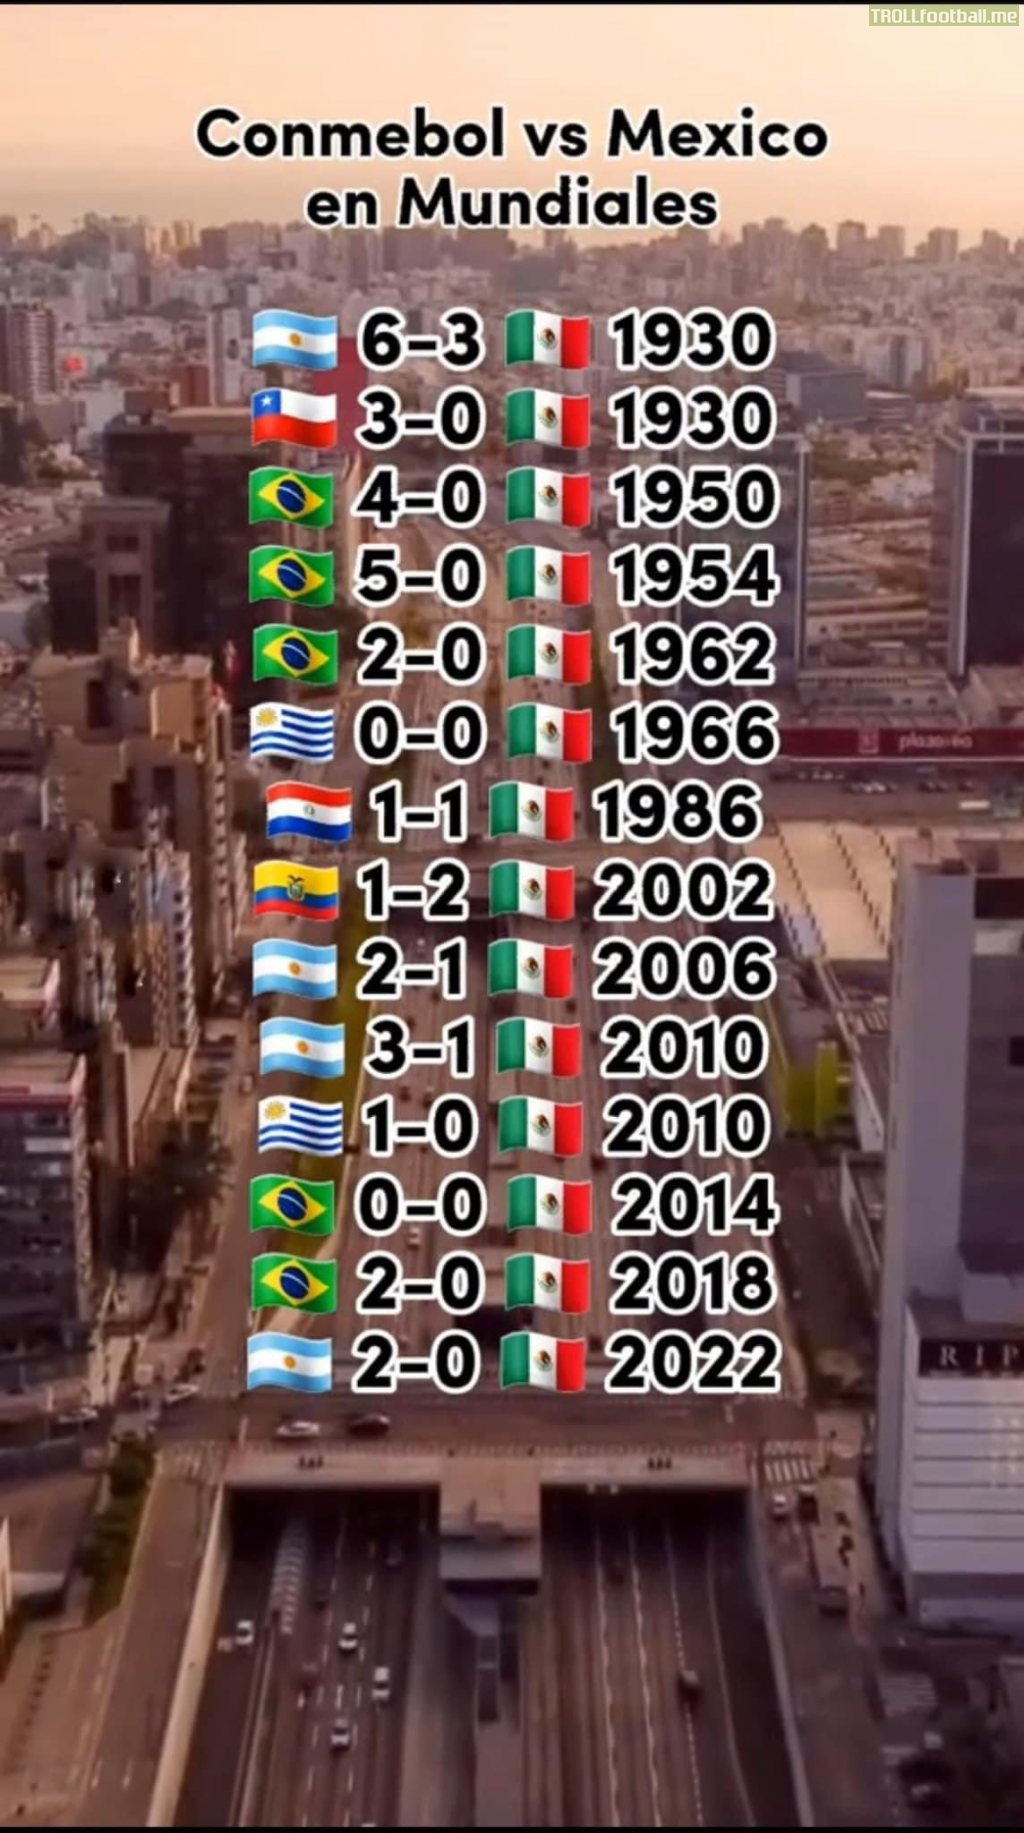 Mexico’s record against South American nations at the world cup.